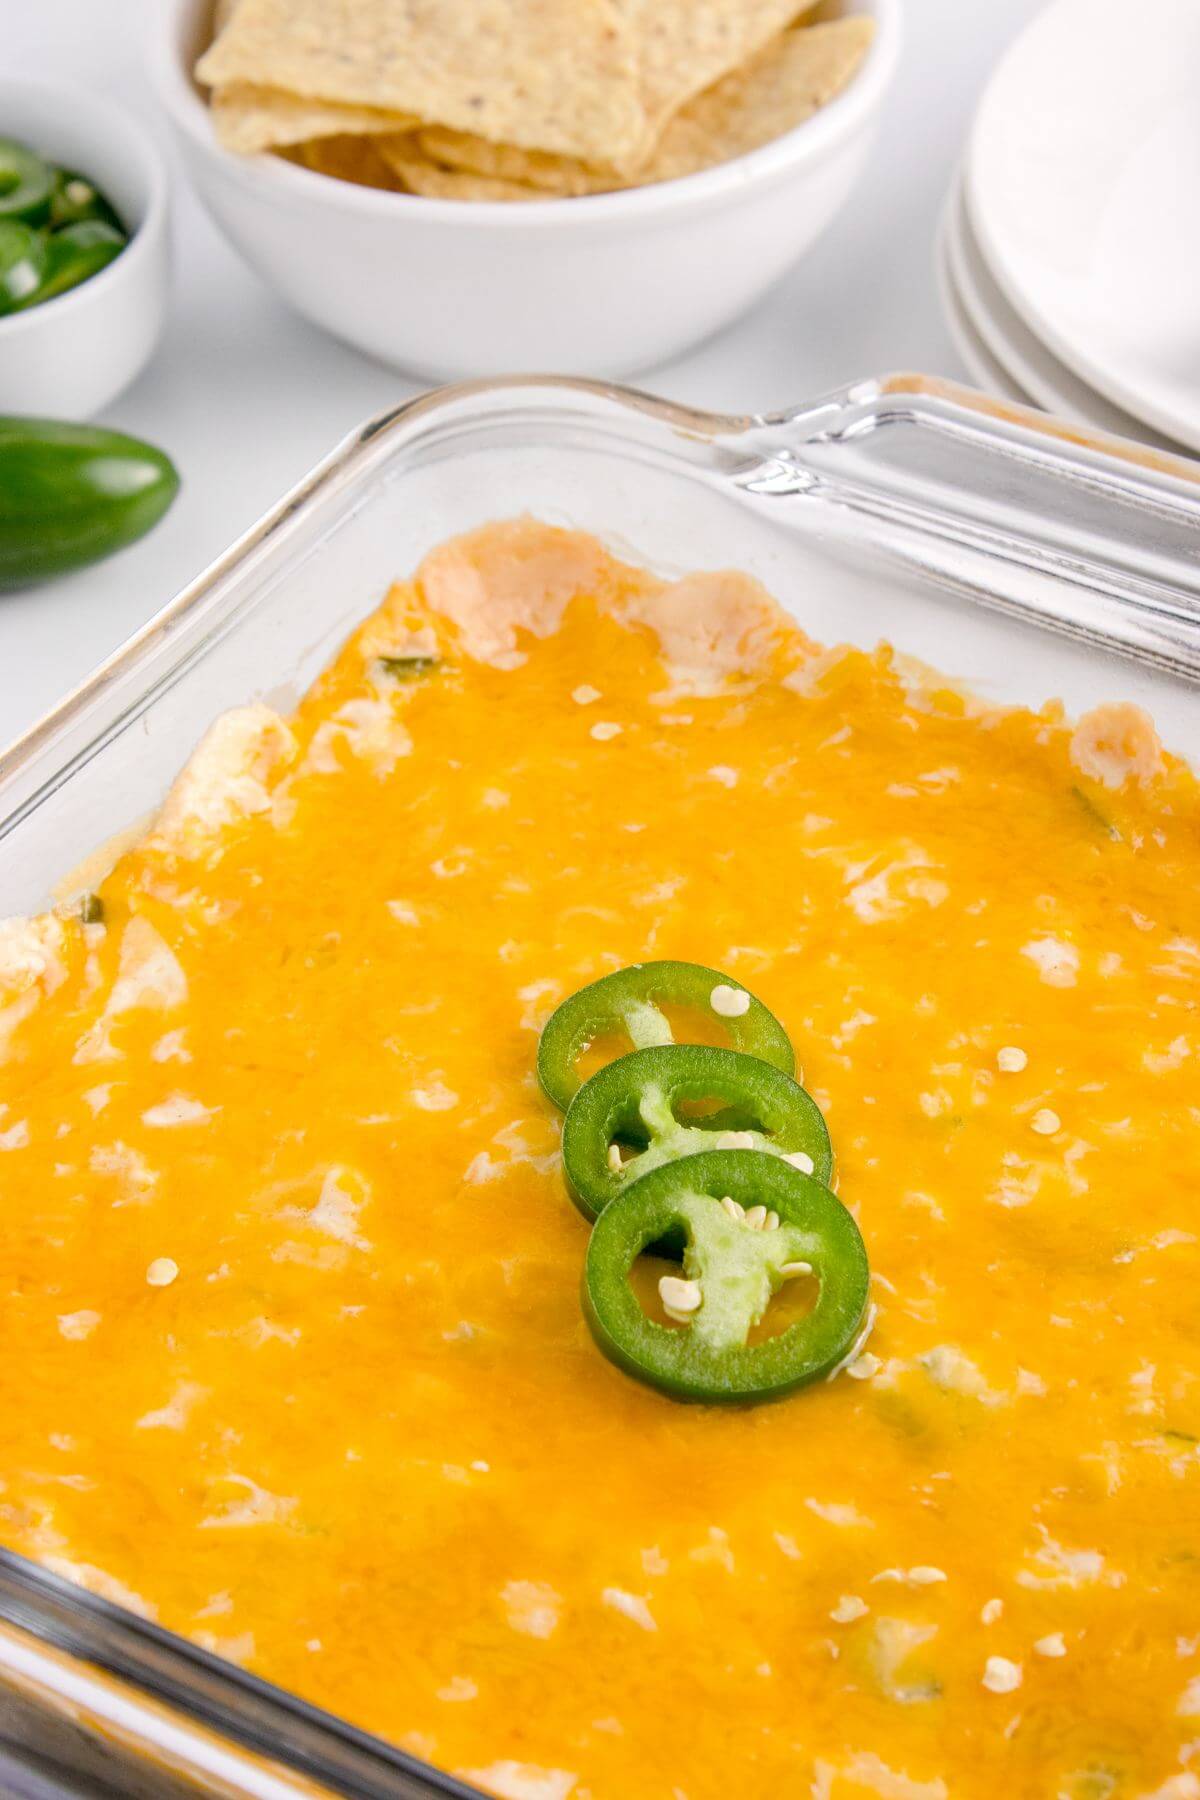 A glass casserole dish full of cheese and jalapenos sits next to tortilla chips and more jalapenos.